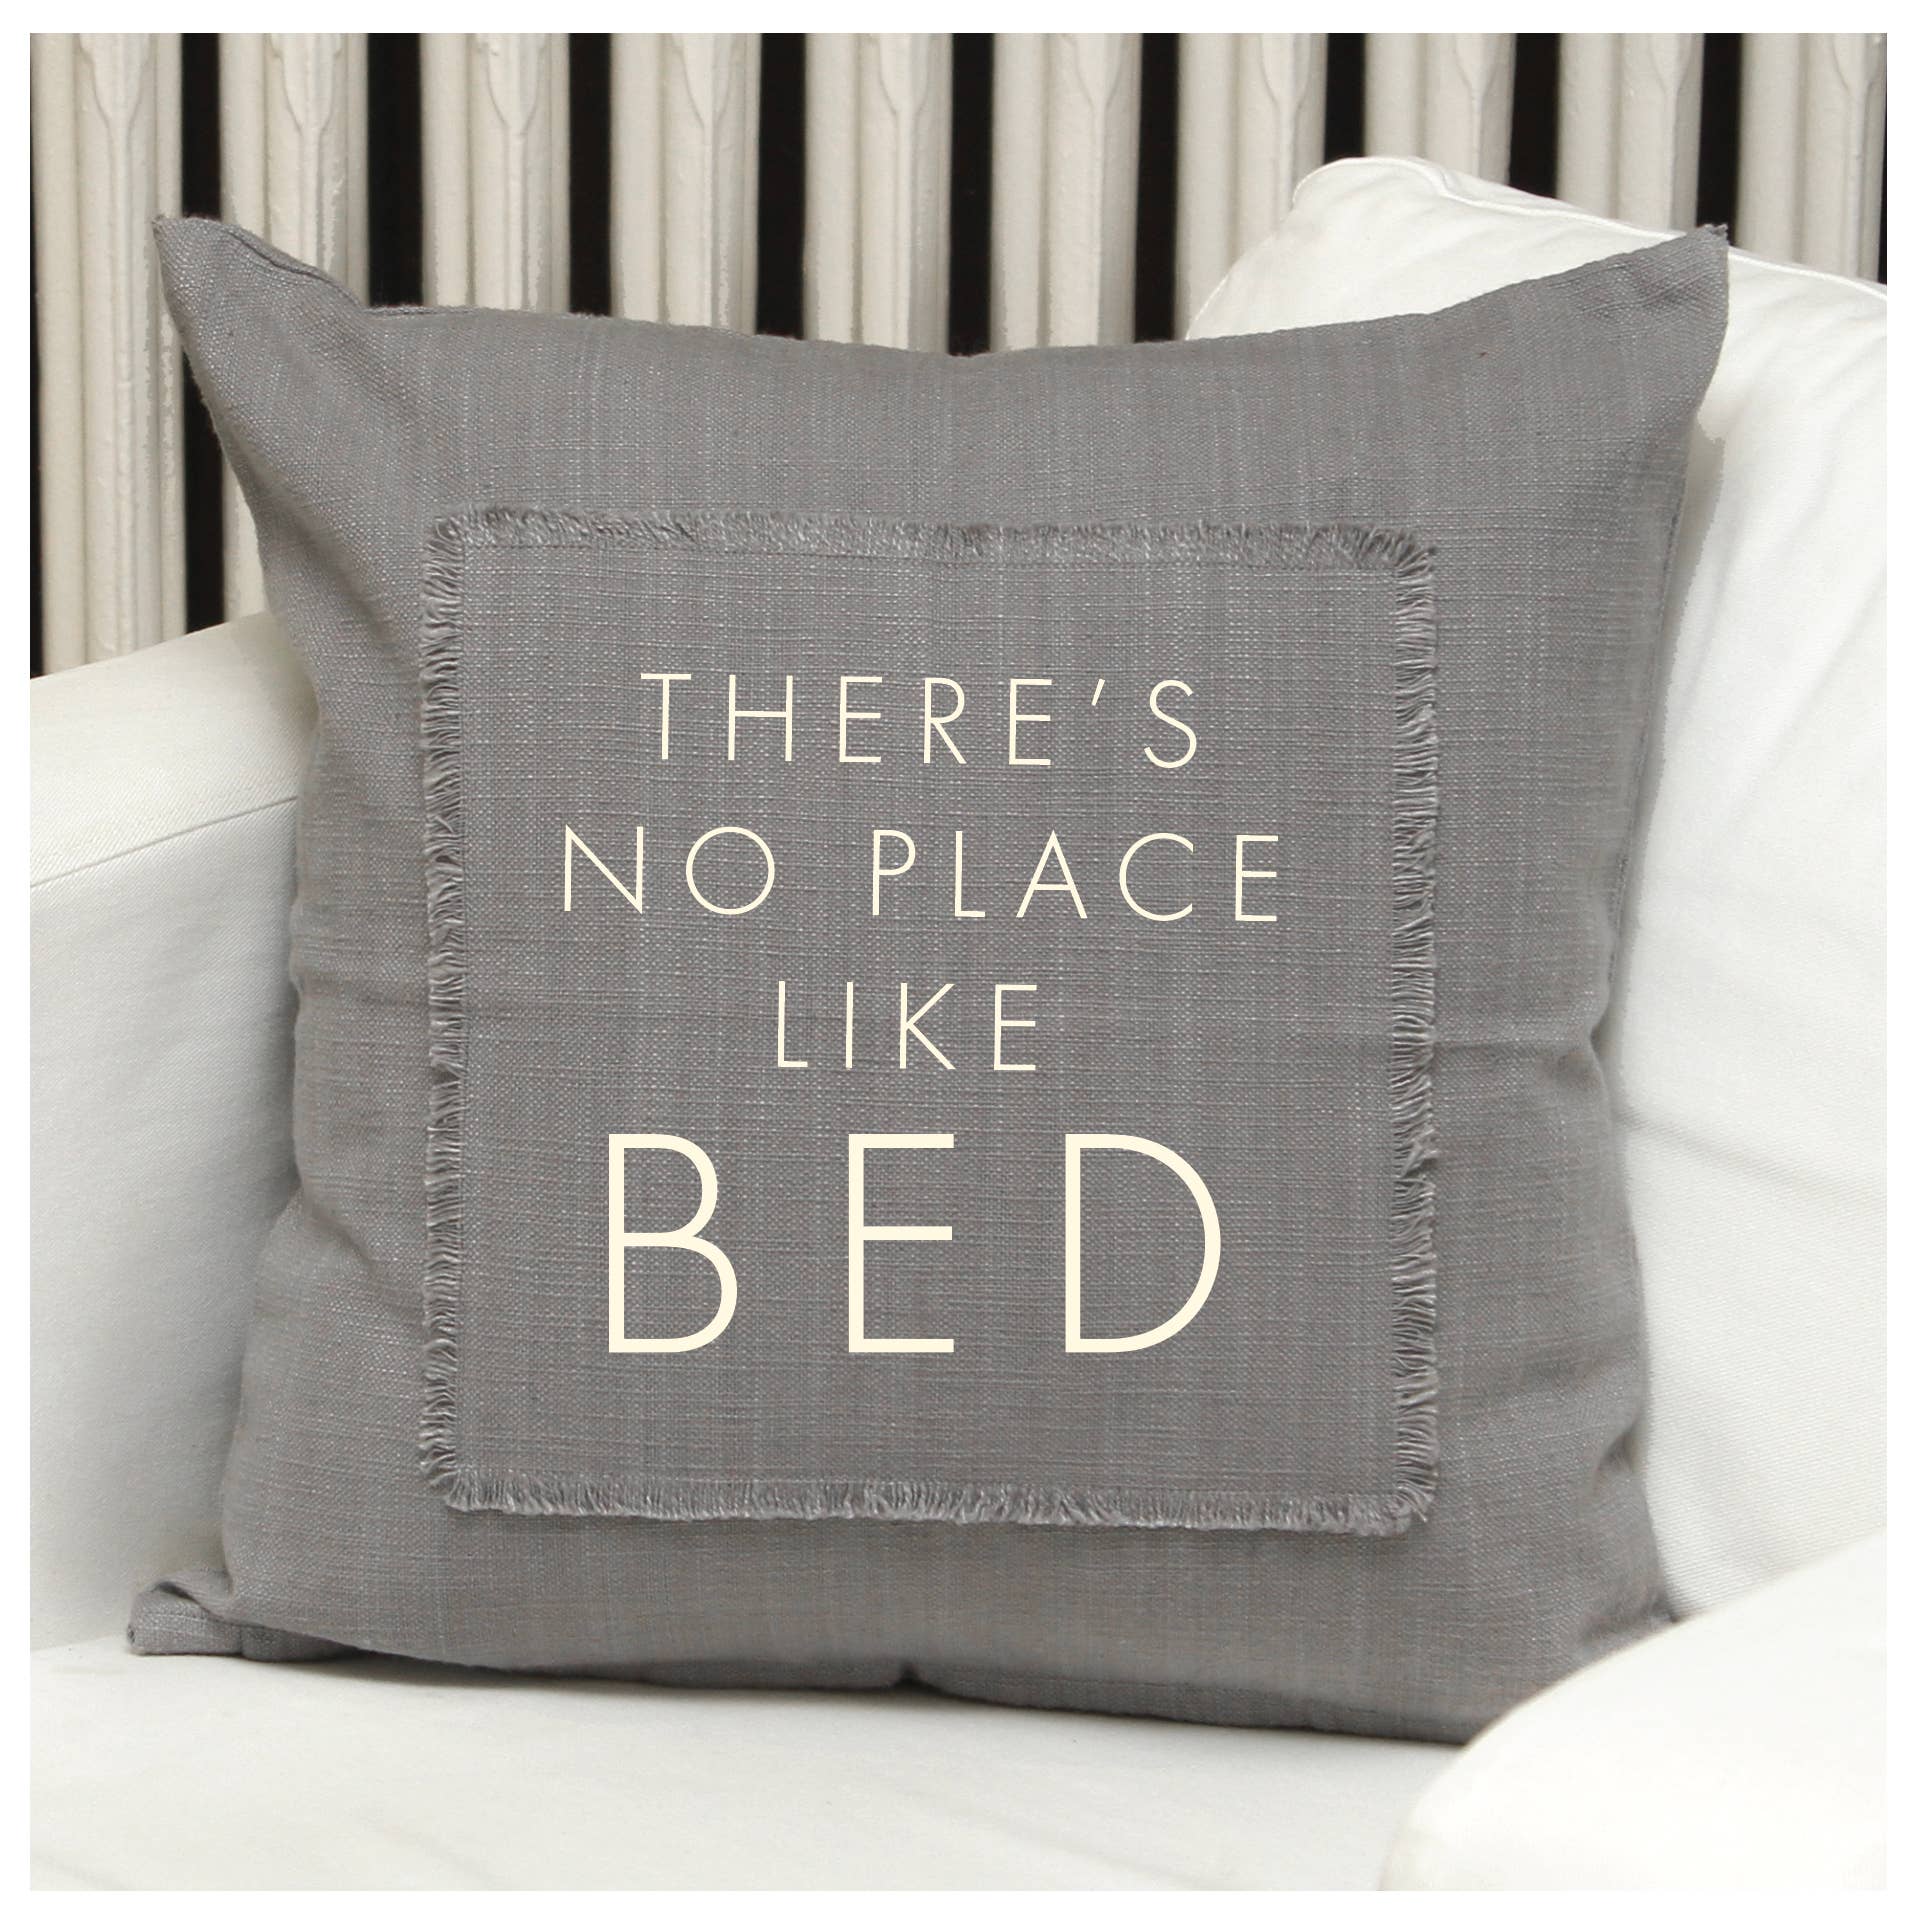 There's no place like bed Pillow Cover